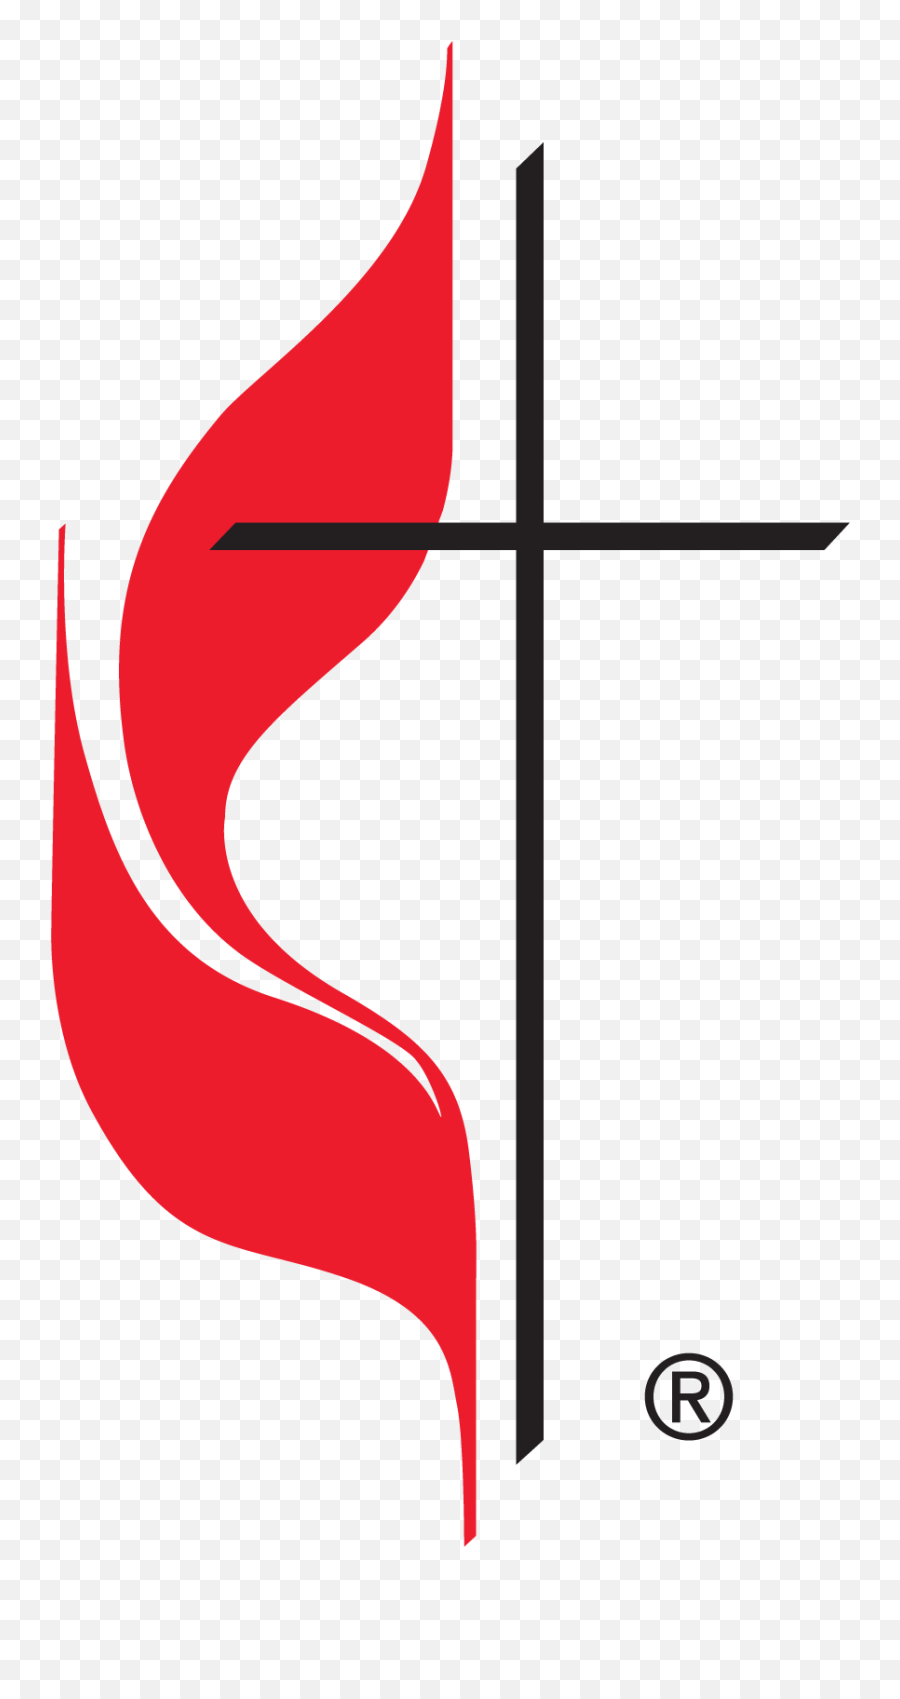 St - Clipart Methodist Cross And Flame Emoji,Inside Out Study Umc Emotions